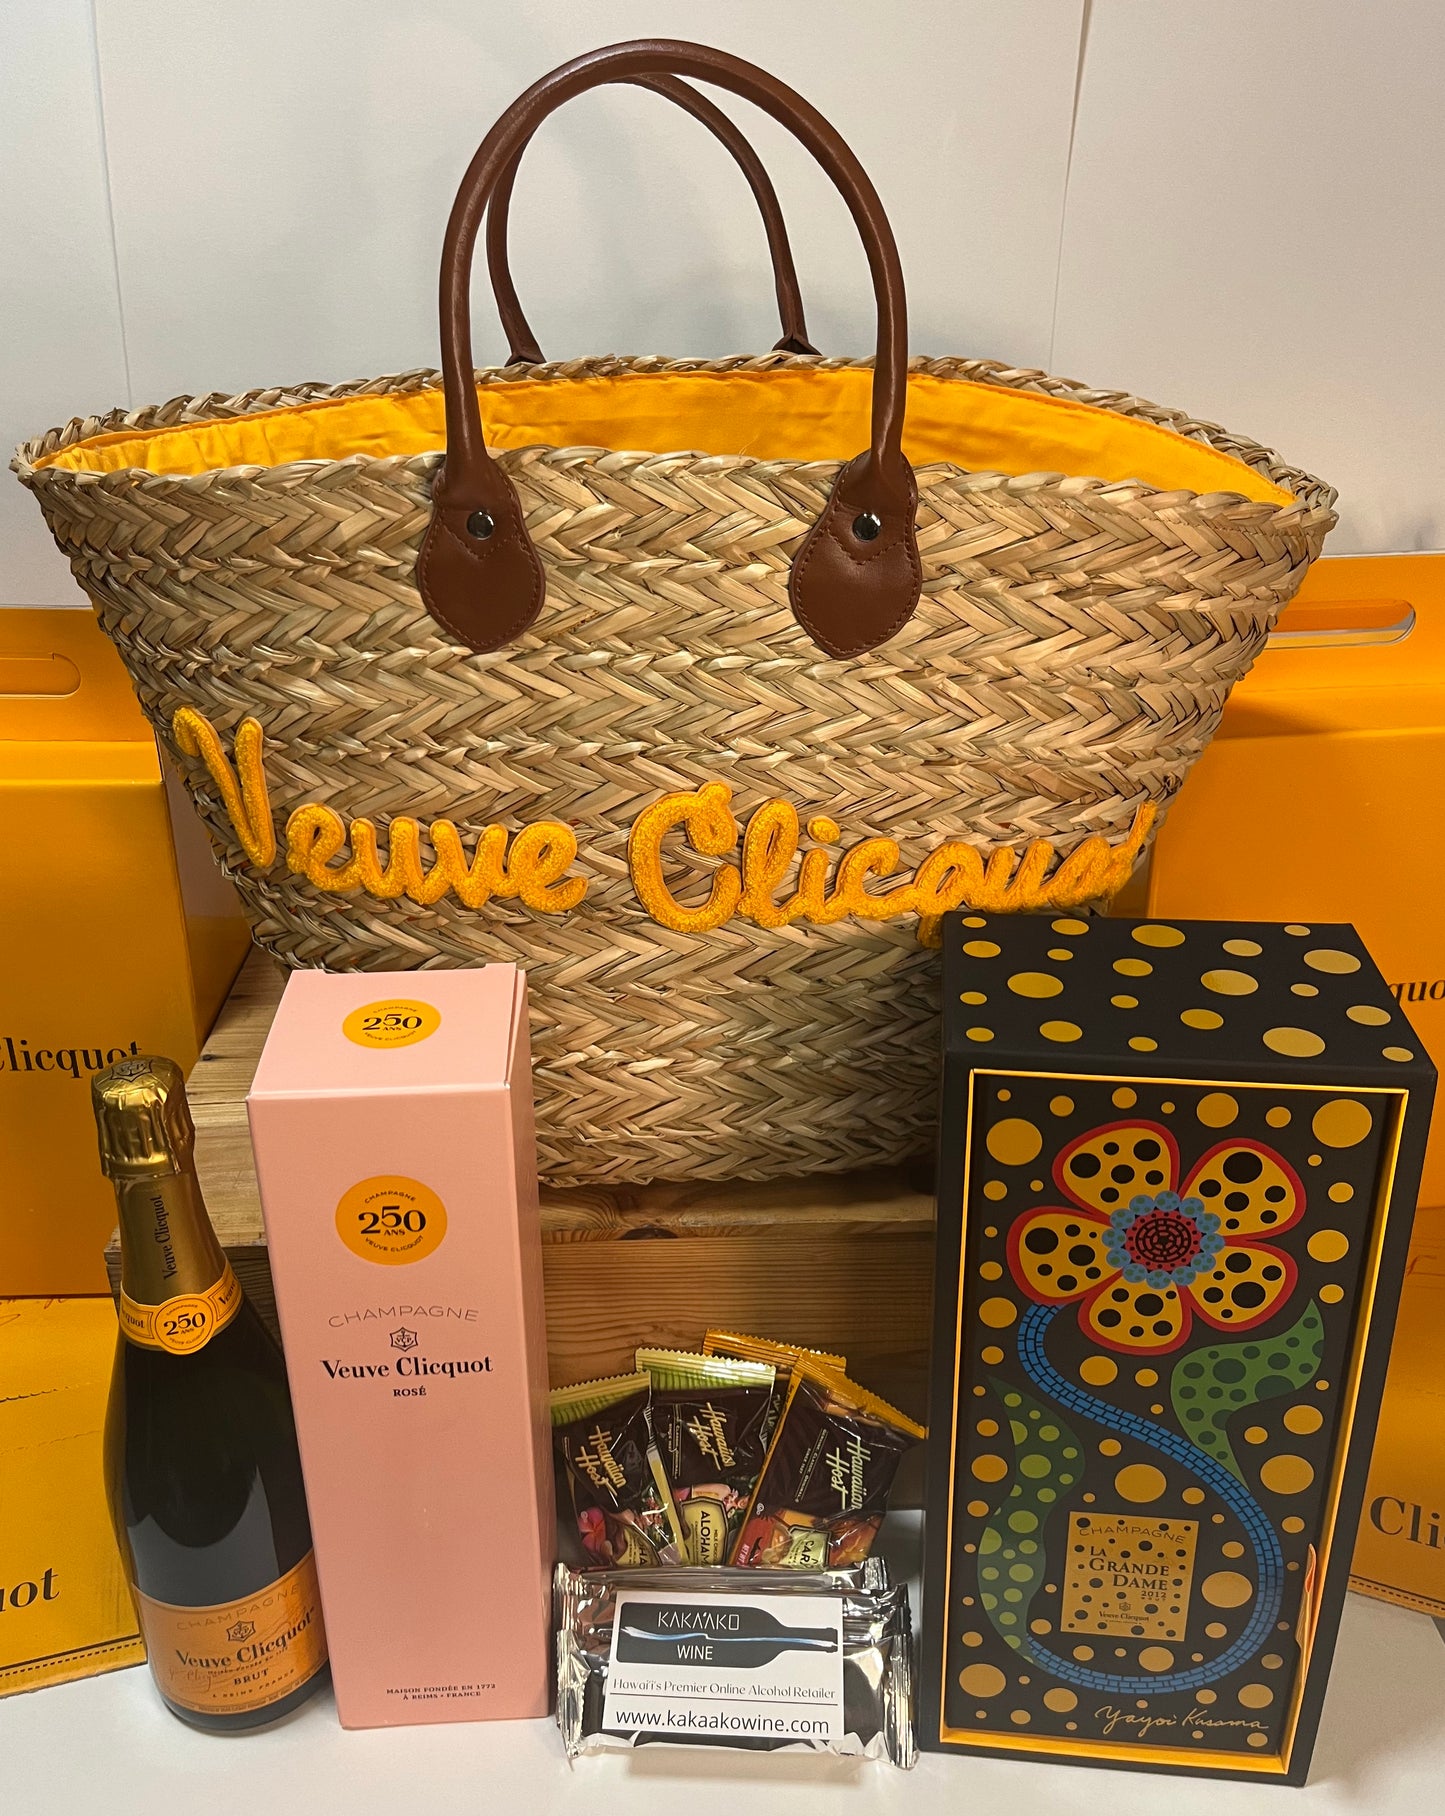 Three expressions of Champagne Veuve Clicquot Gift Set with Collector Tote